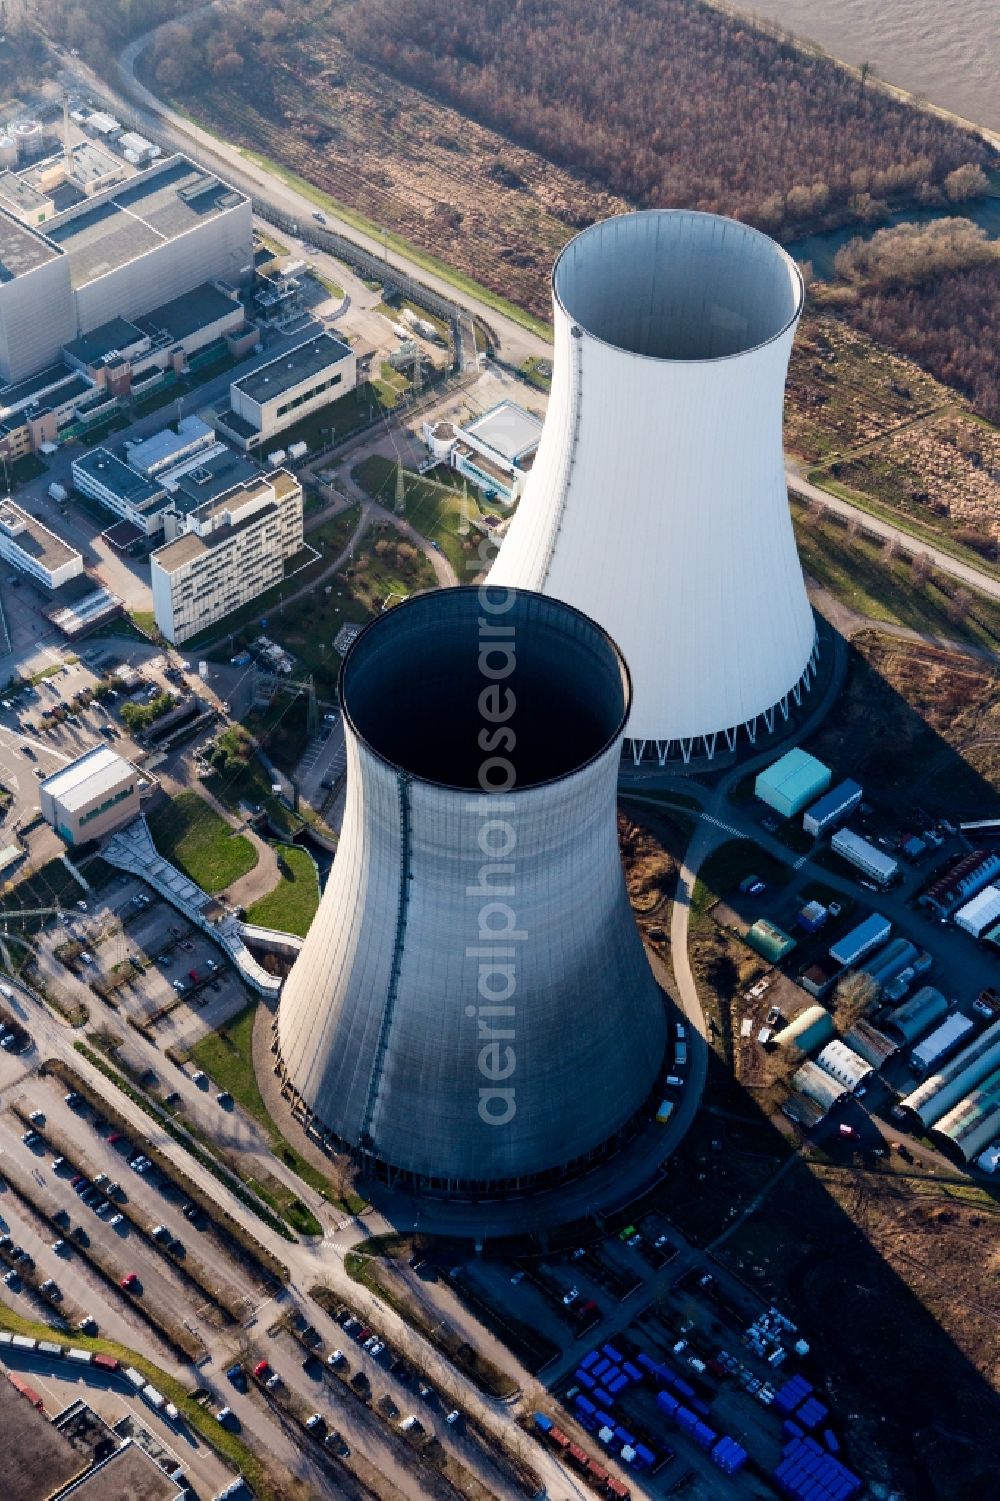 Philippsburg from the bird's eye view: Building remains of the reactor units and facilities of the NPP nuclear power plant of EnBW Kernkraft GmbH on Rheinschanzinsel in Philippsburg in the state Baden-Wuerttemberg, Germany